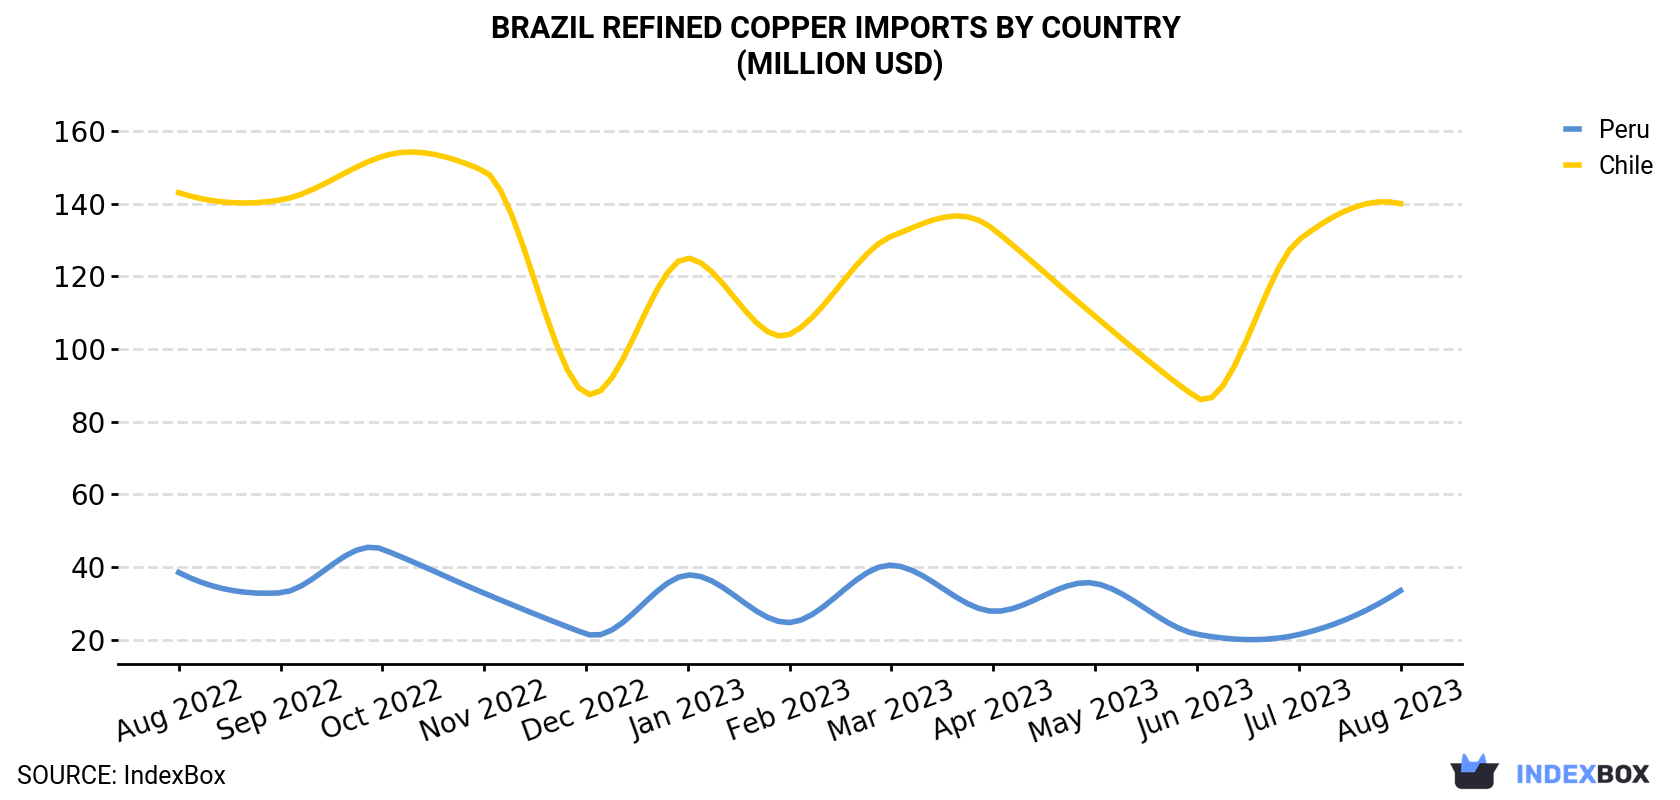 Brazil Refined Copper Imports By Country (Million USD)